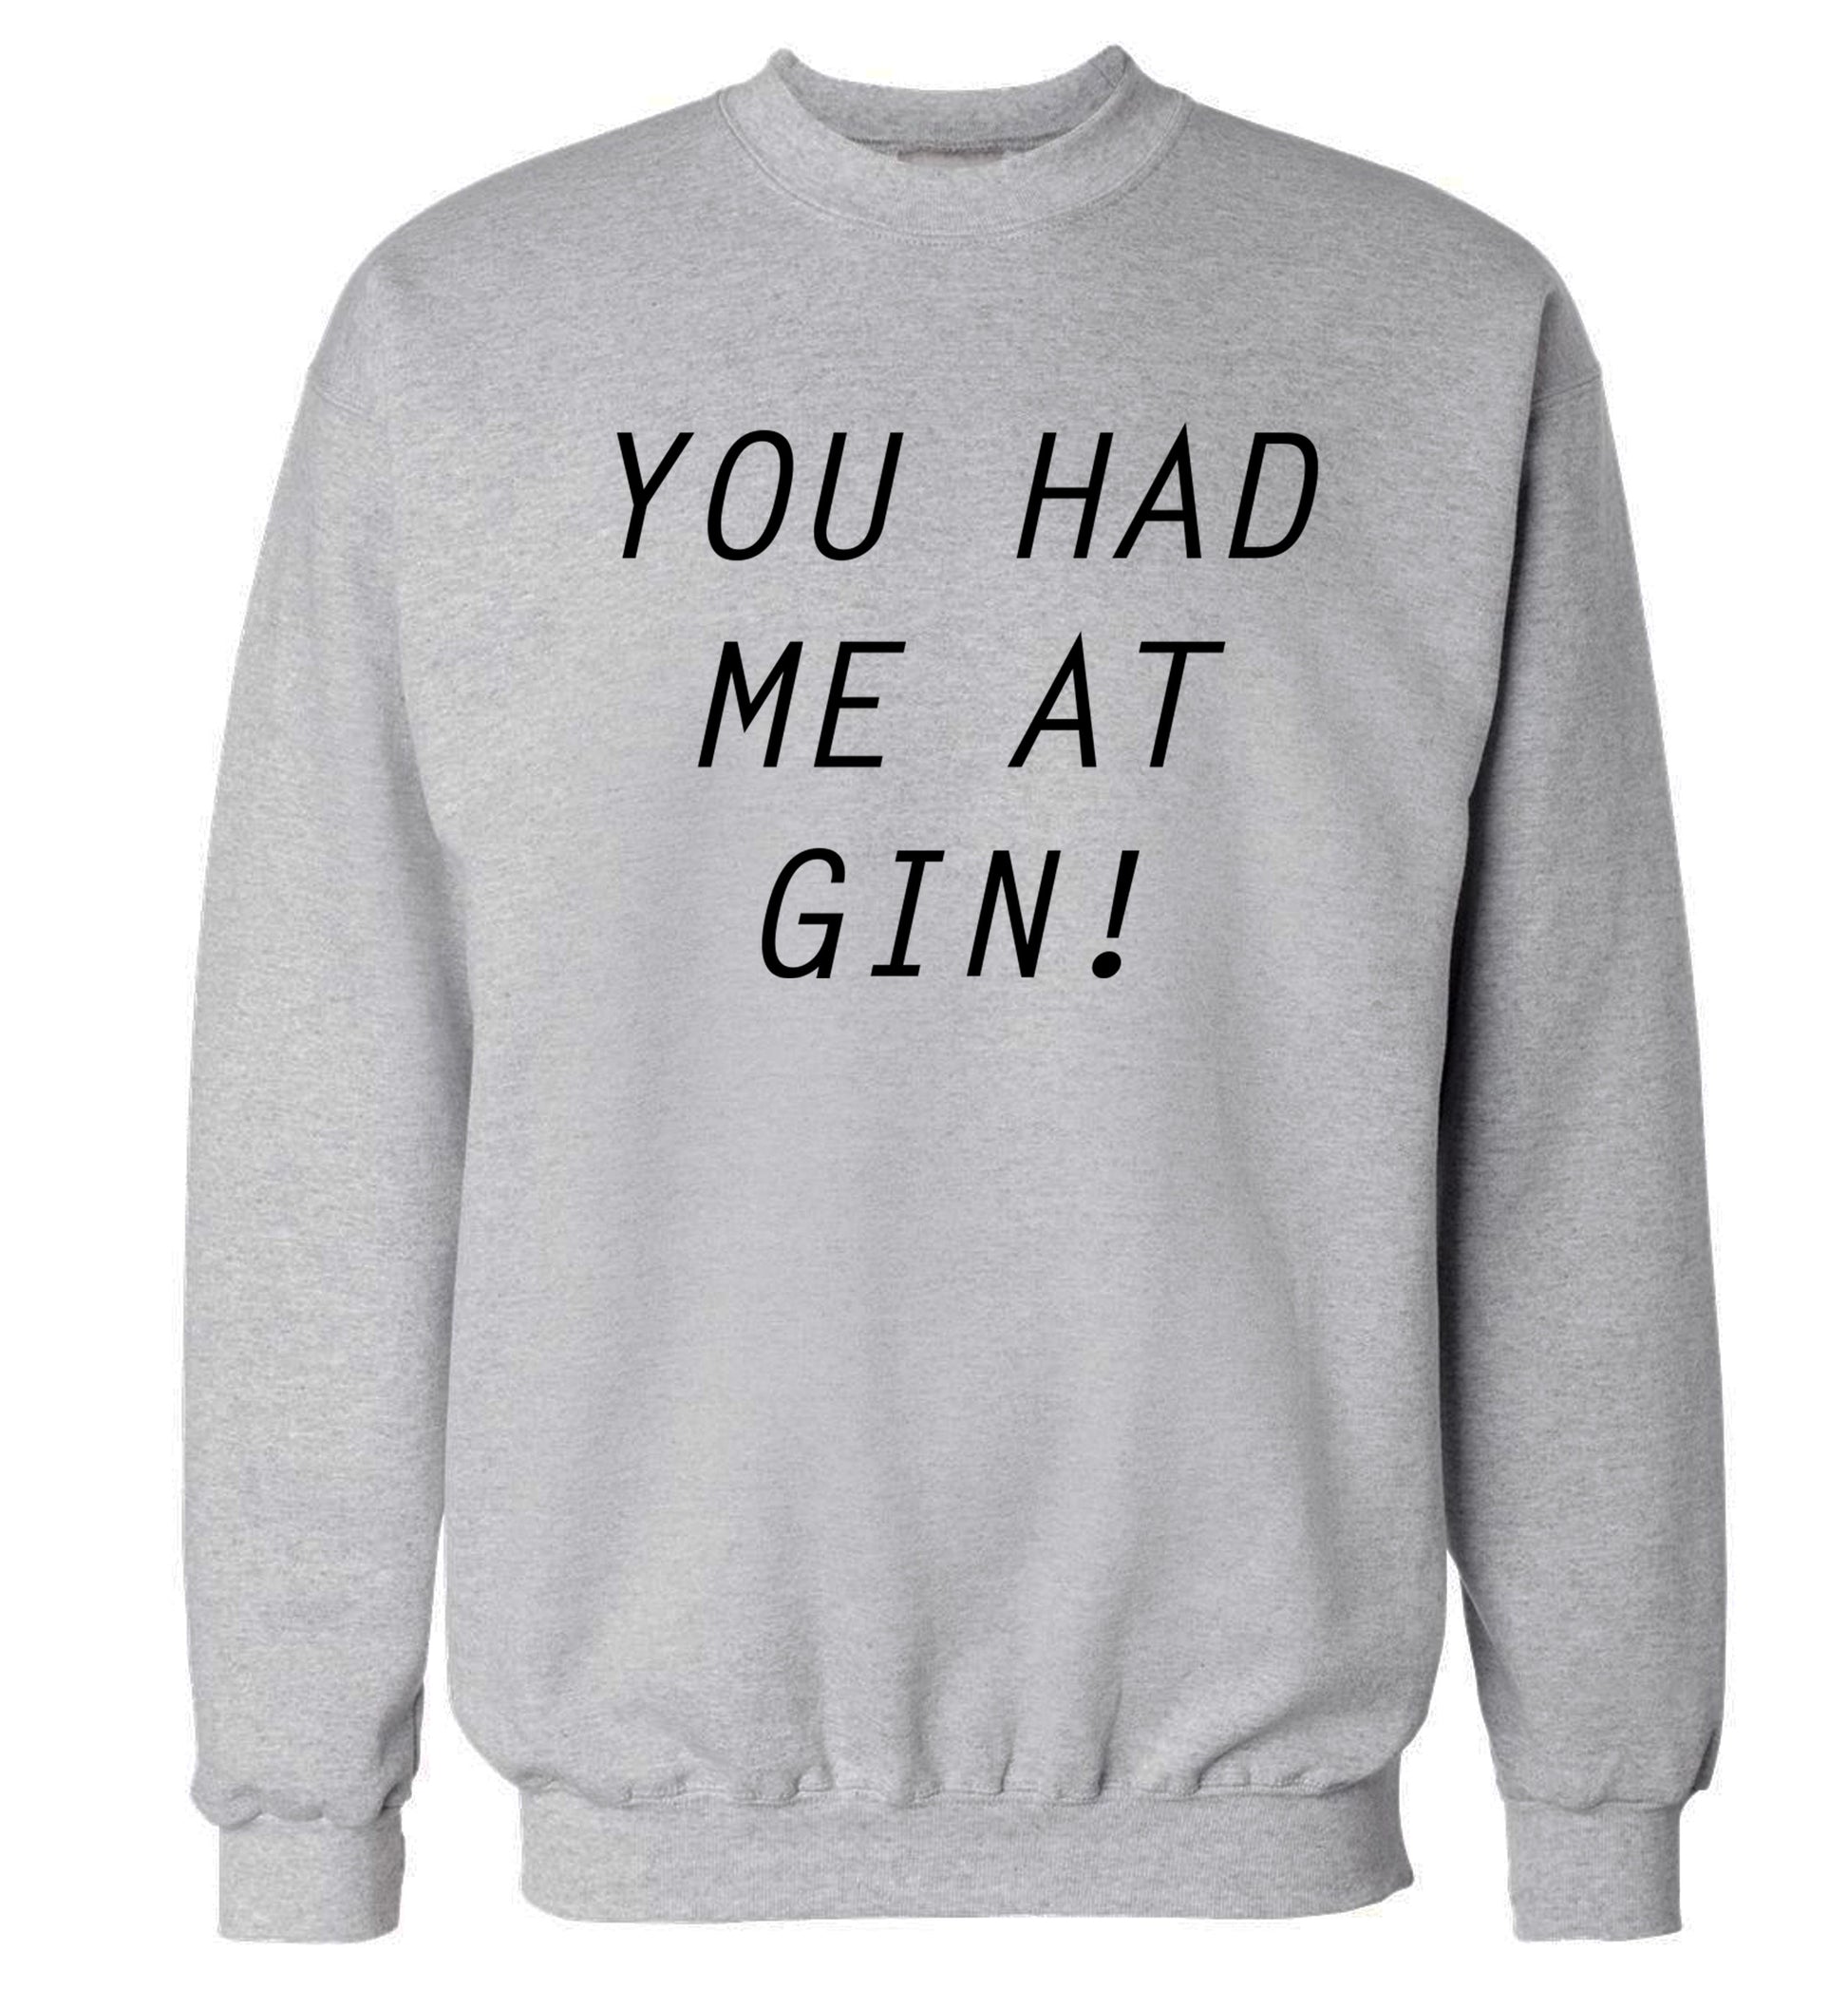 You had me at gin Adult's unisex grey Sweater 2XL